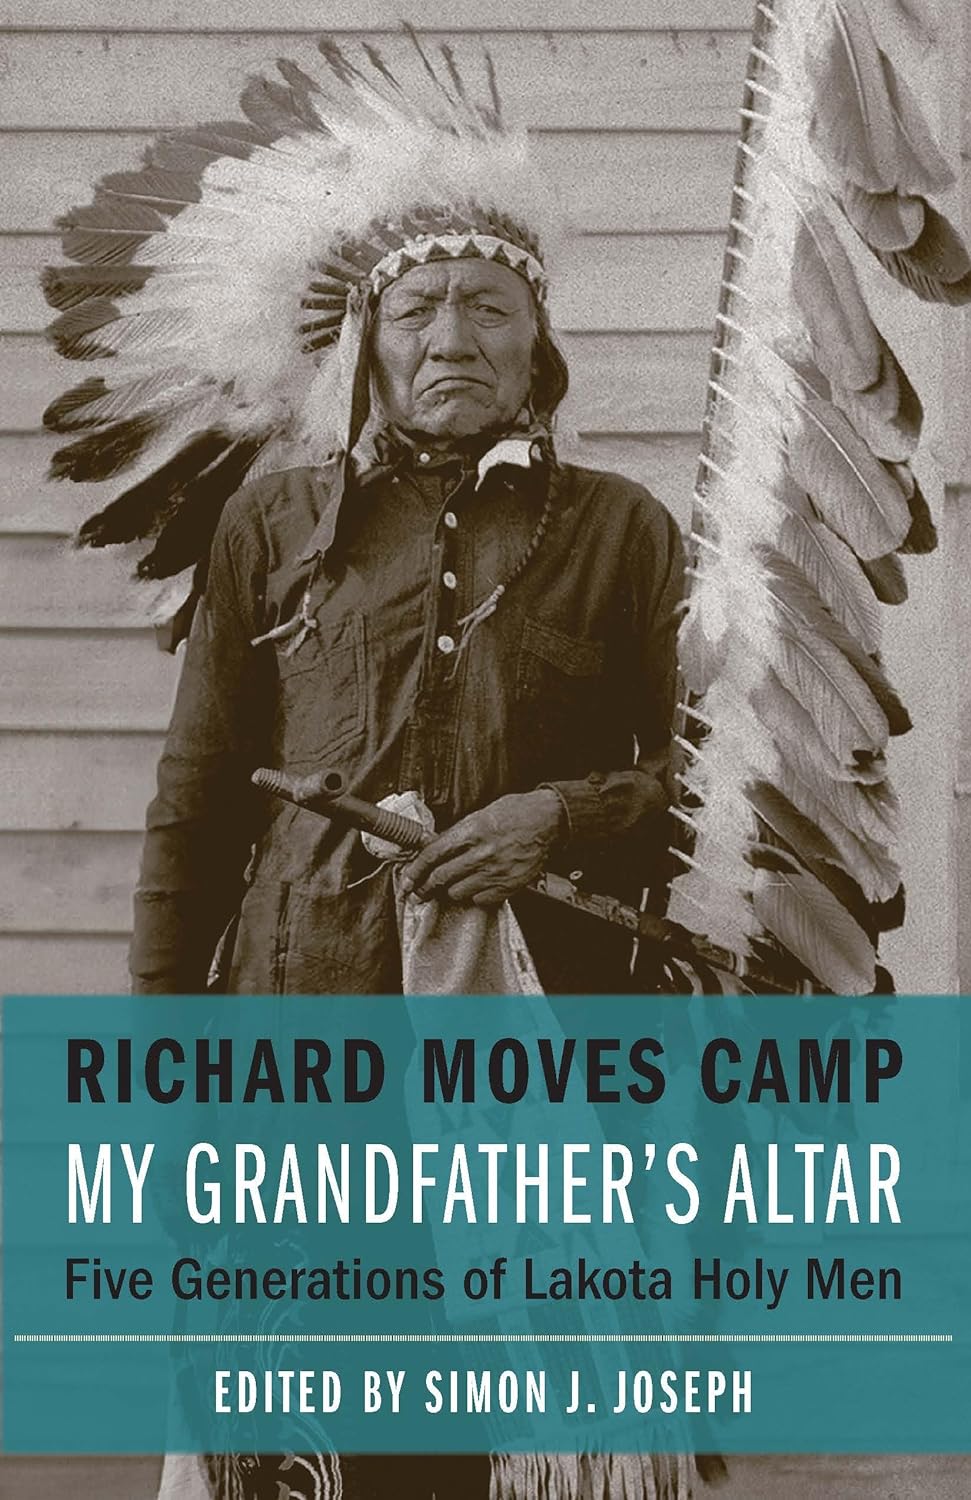 My Grandfather's Altar: Five Generations of Lakota Holy Men by Richard Moves Camp